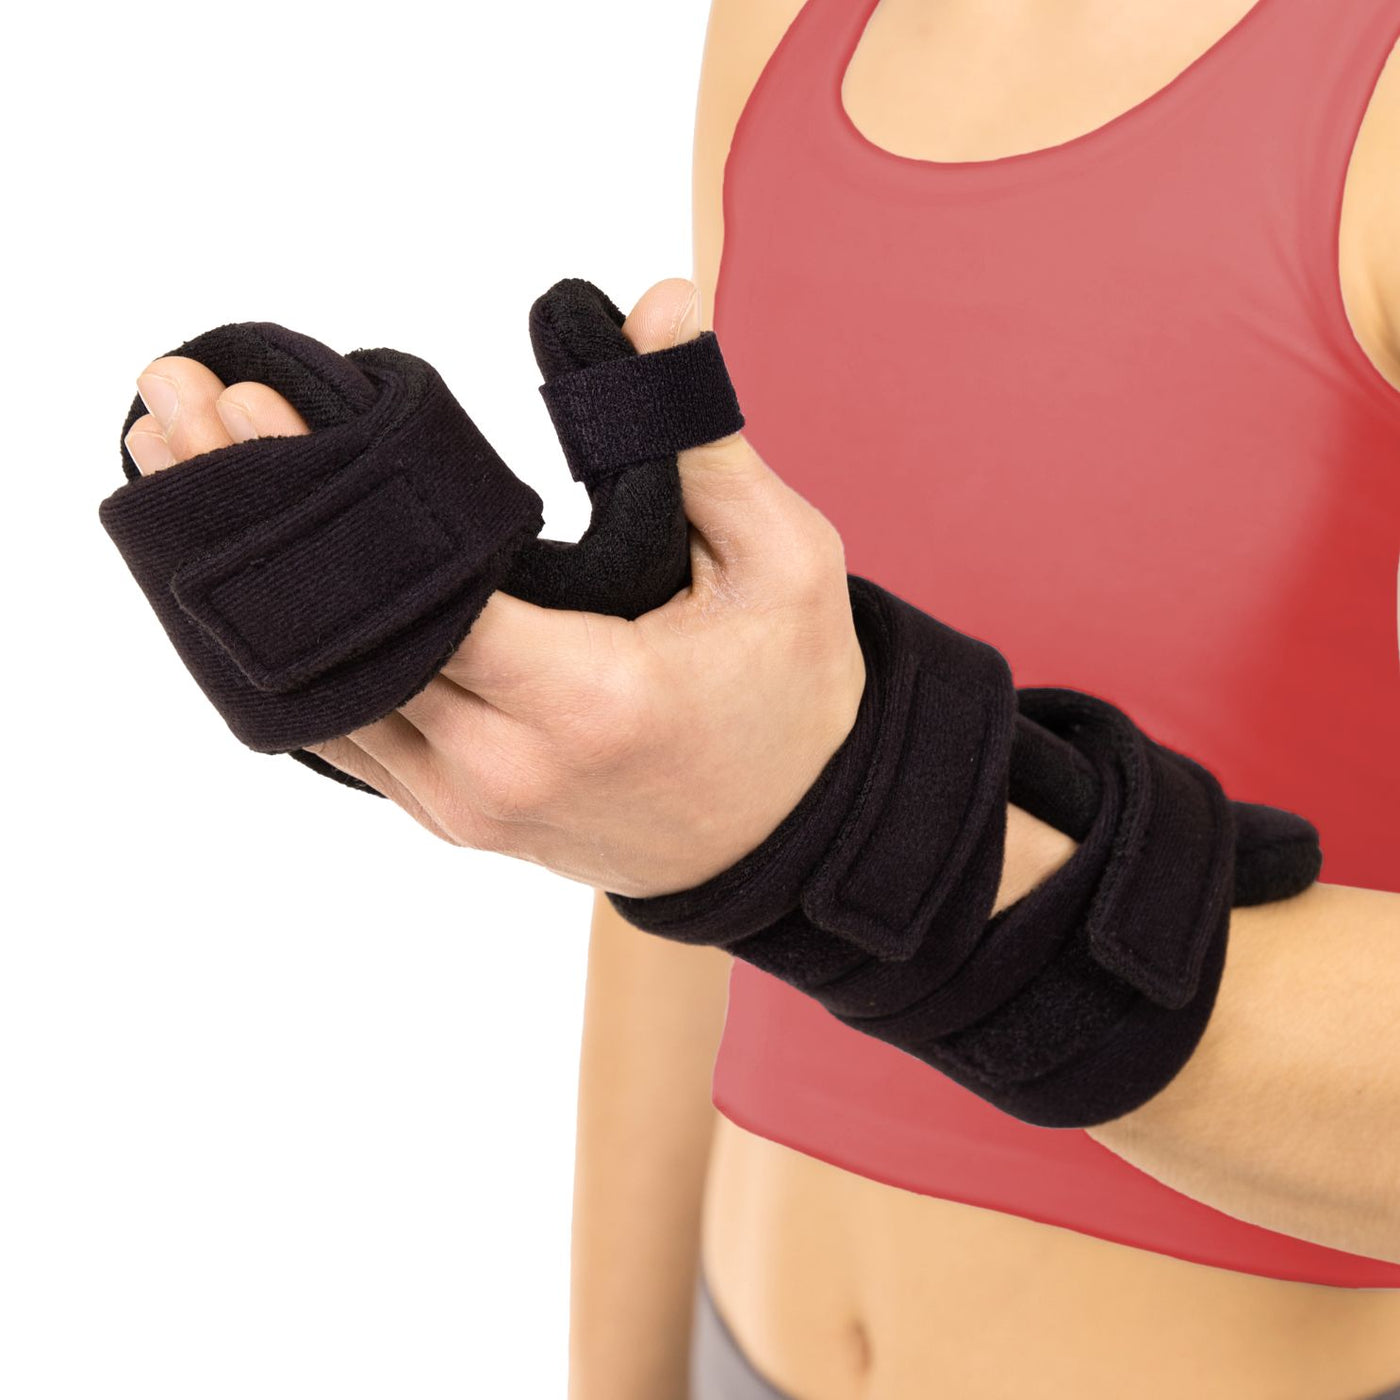 BraceAbility Volar Wrist Splint - Right or Left Hand Compression Support  Brace for Carpal Tunnel Syndrome Relief, Fracture Pain, Sprained Injury